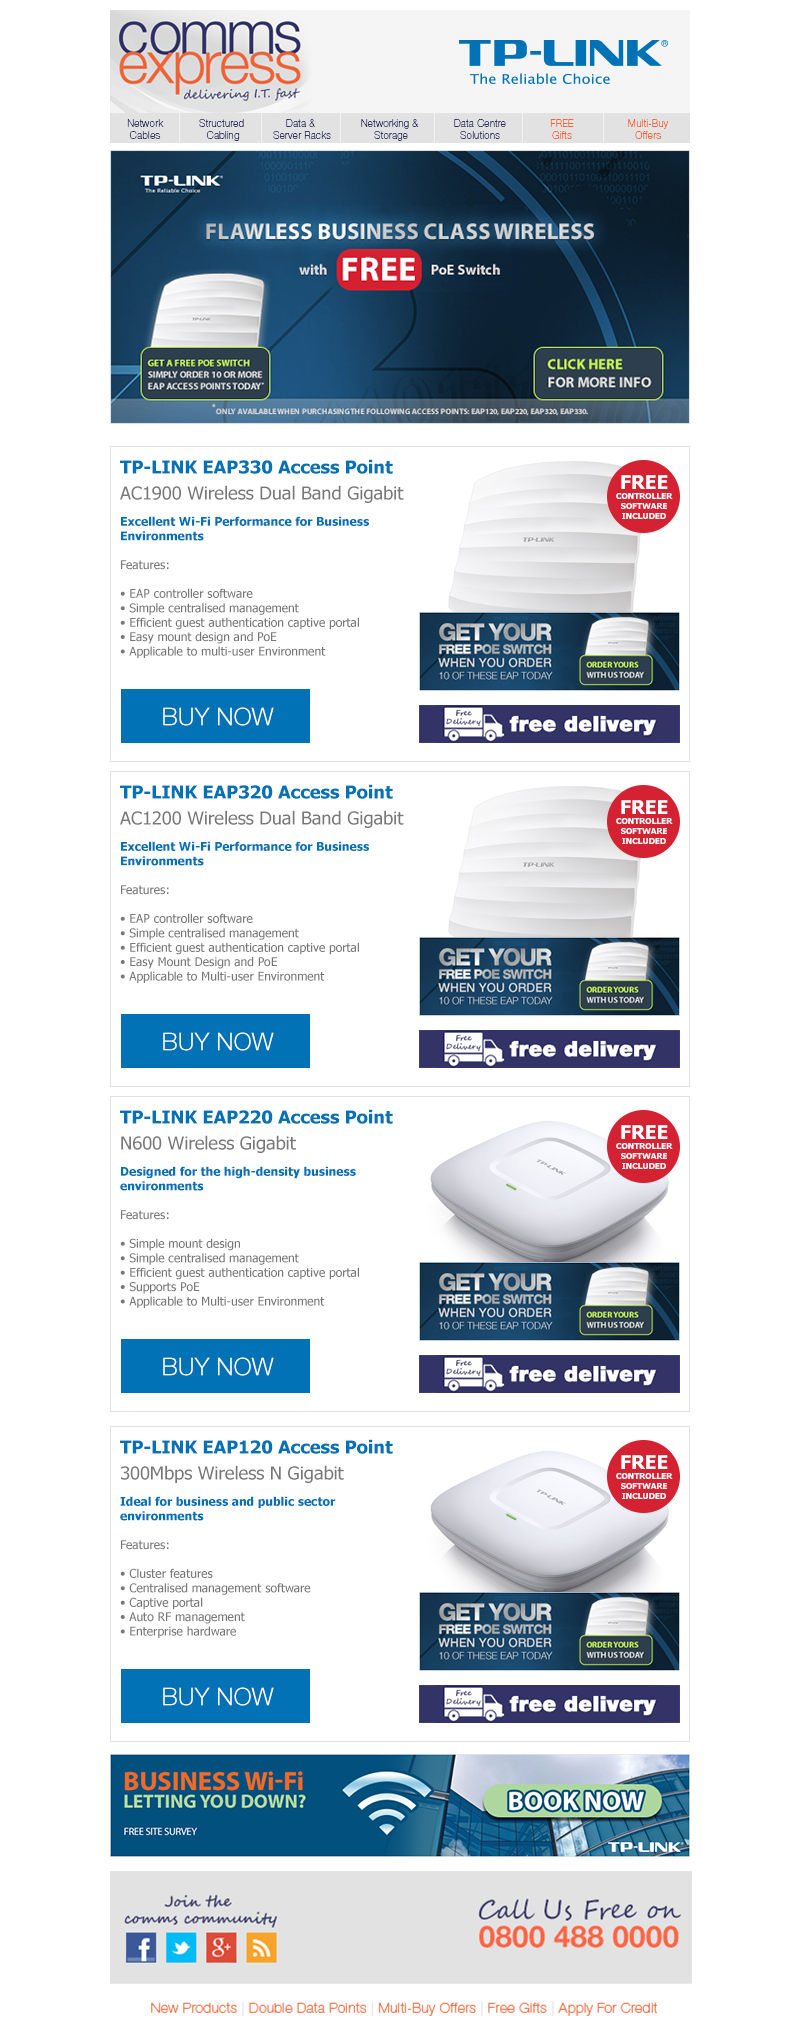 Get Your FREE PoE Switch with TP-LINKs Business Class W